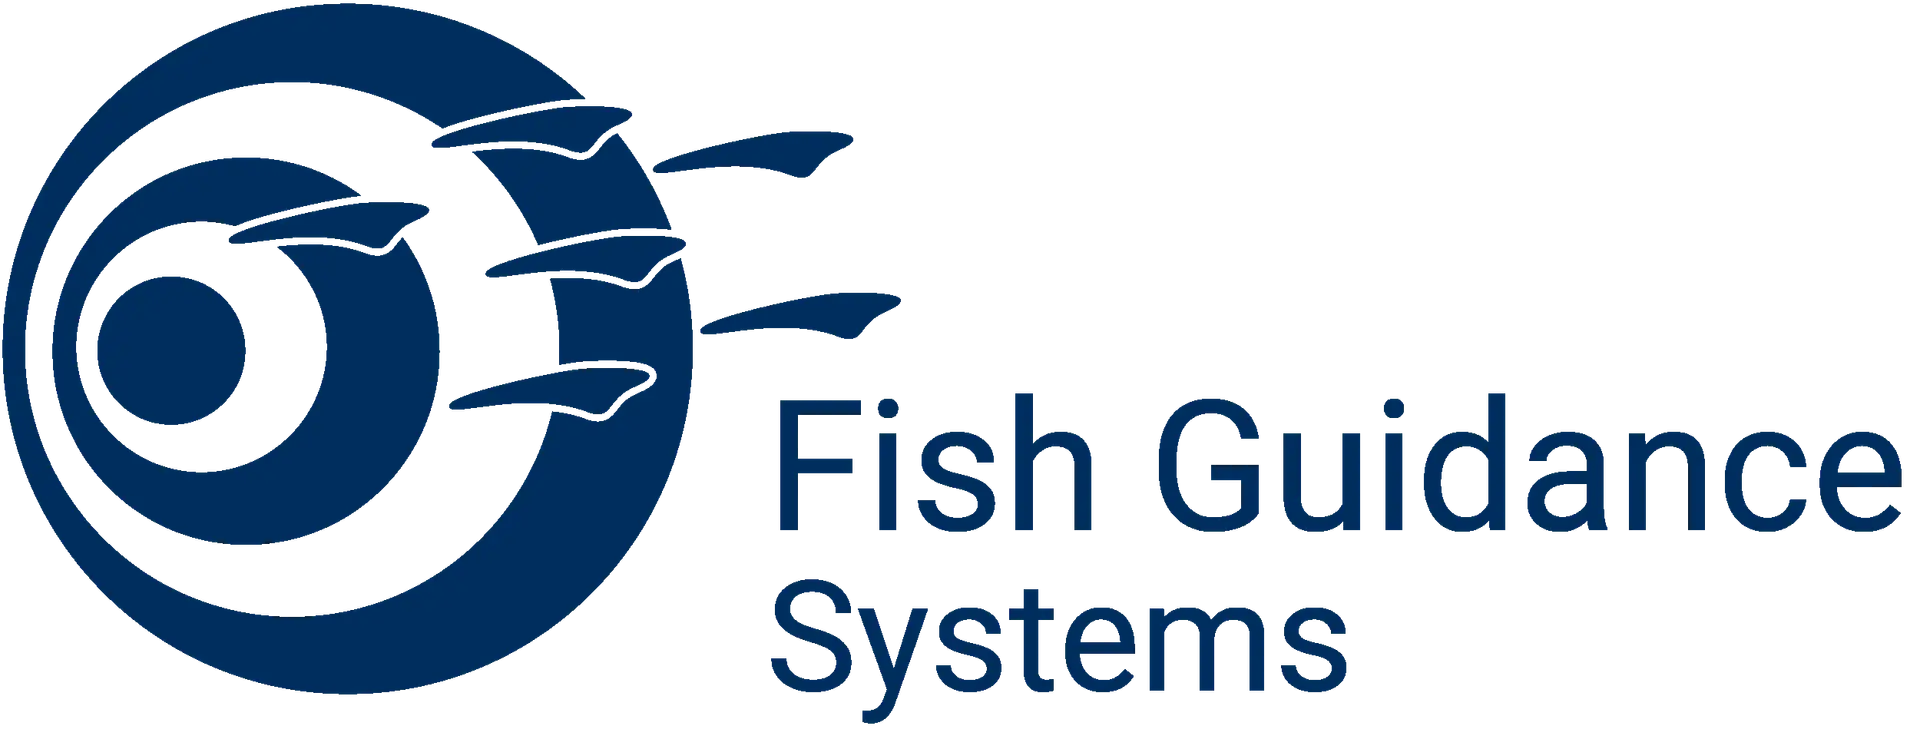 Fish Guidance Systems